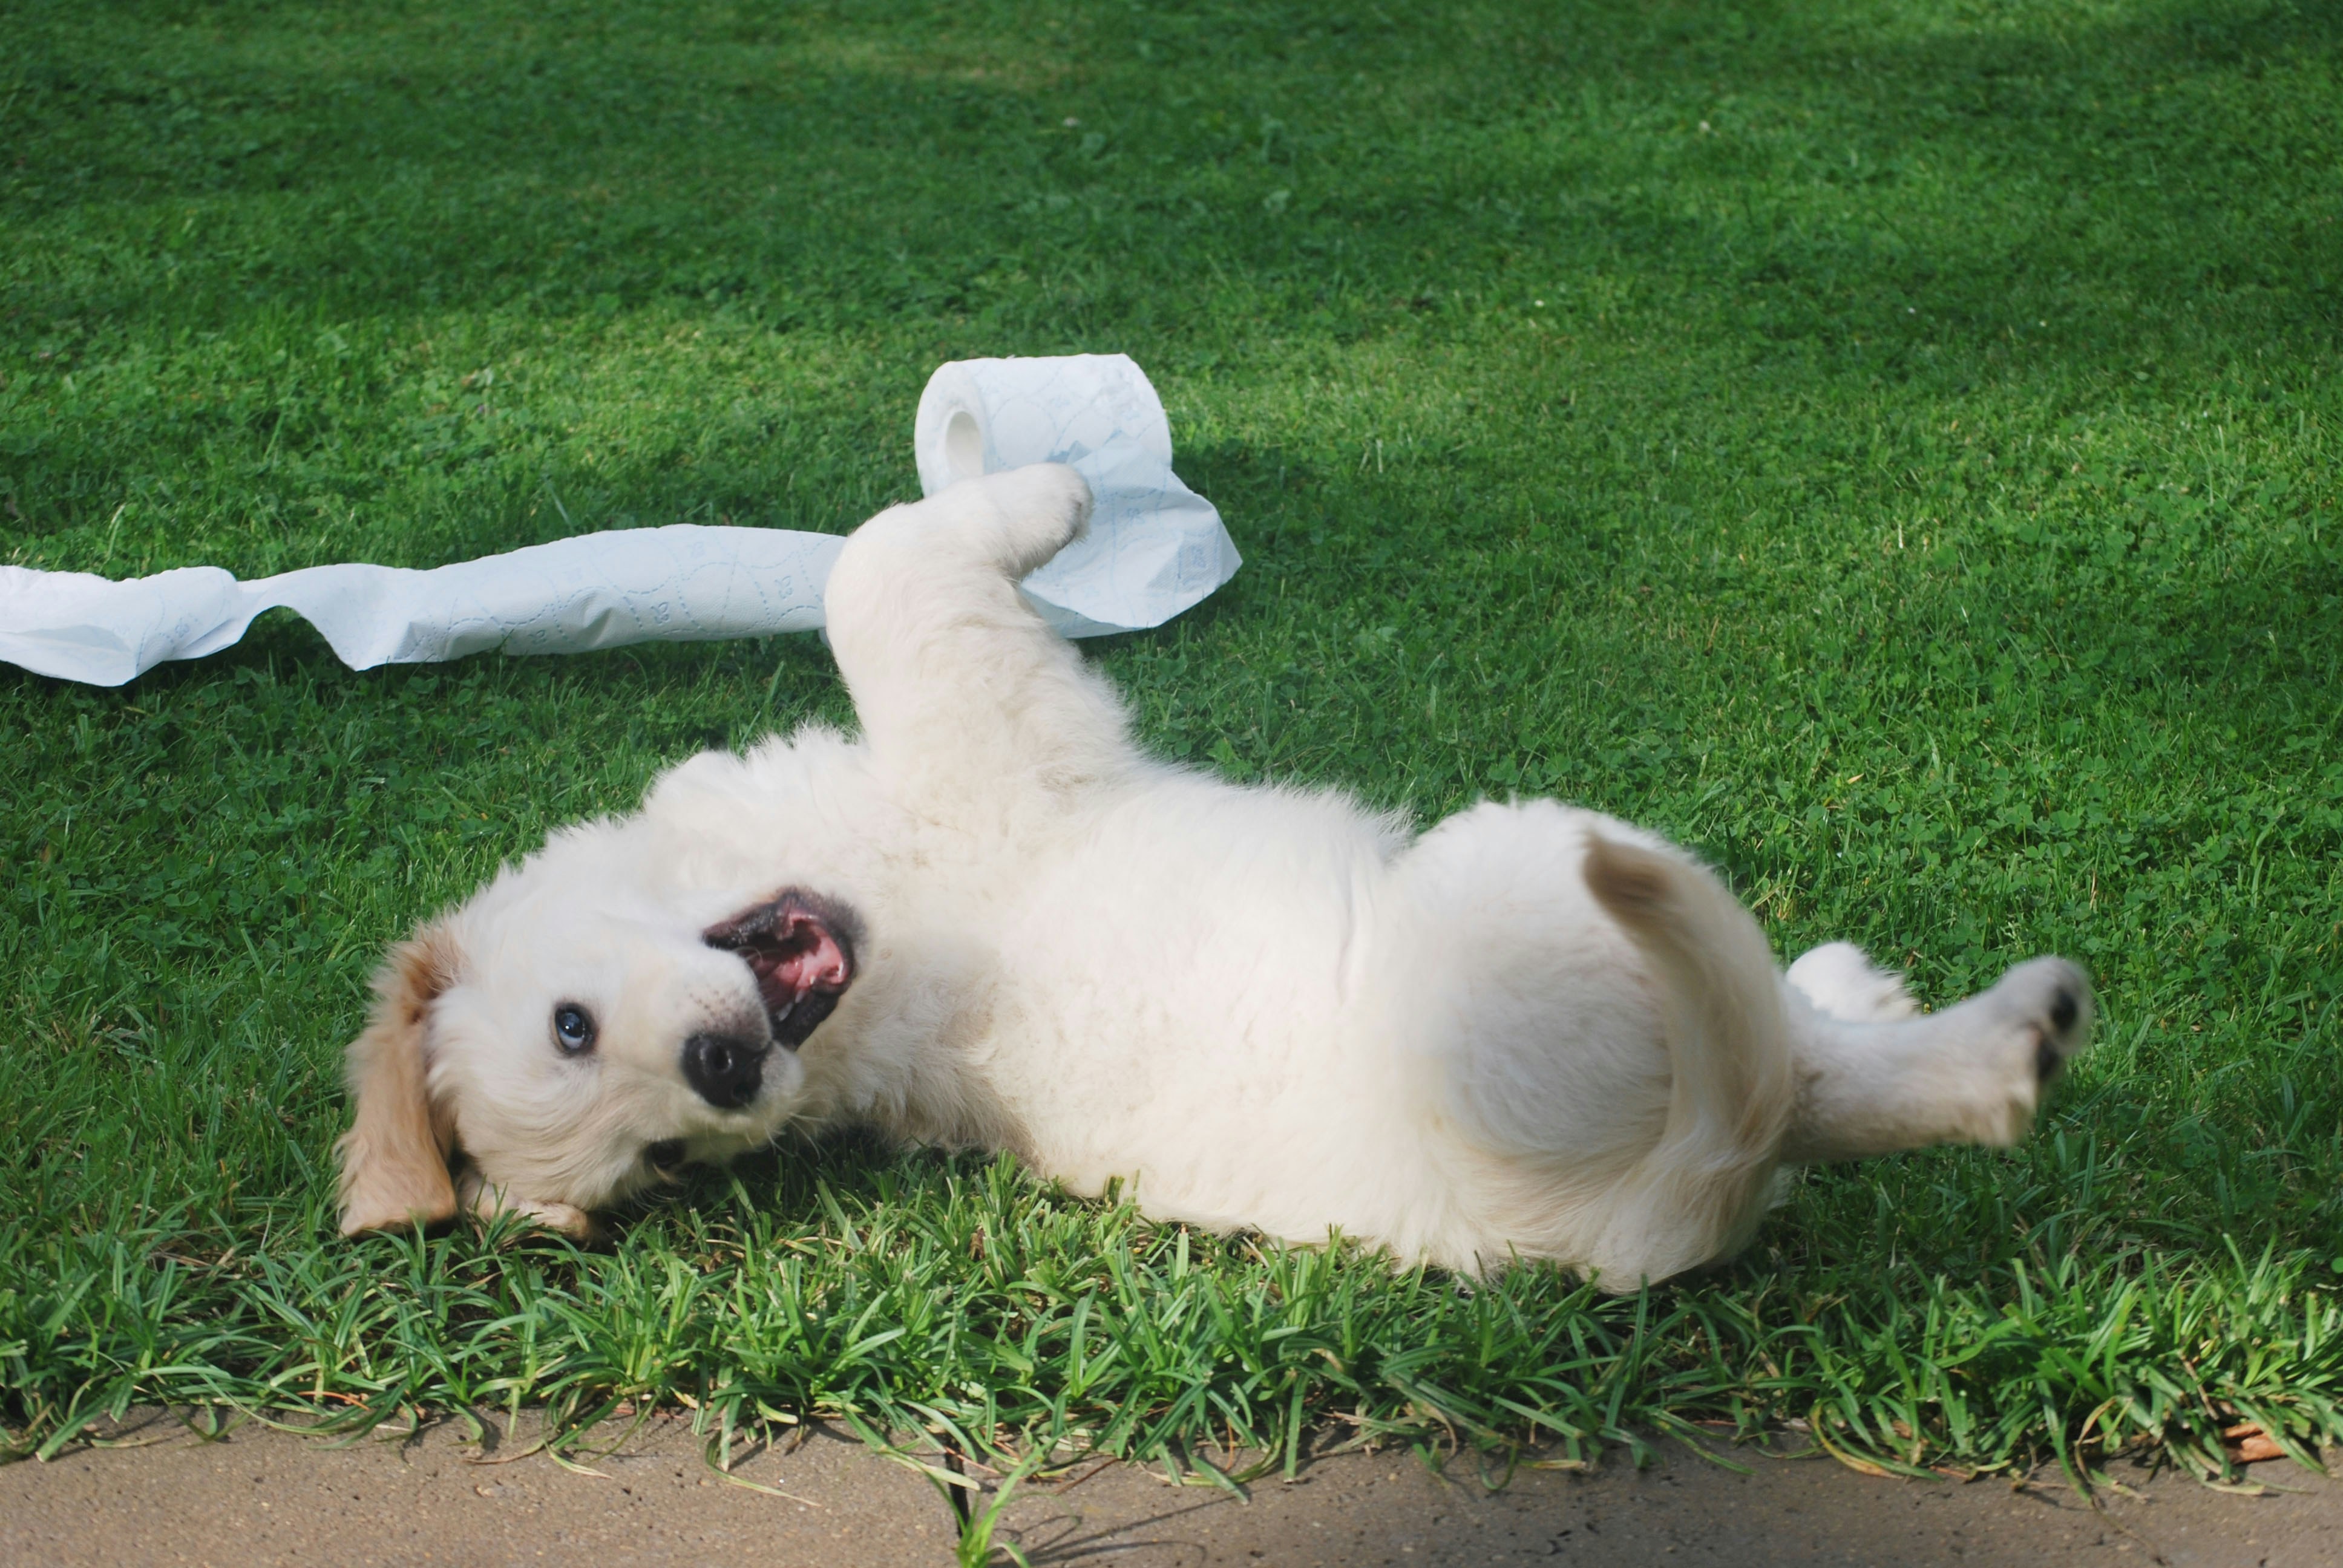 10 things to avoid when training your puppy